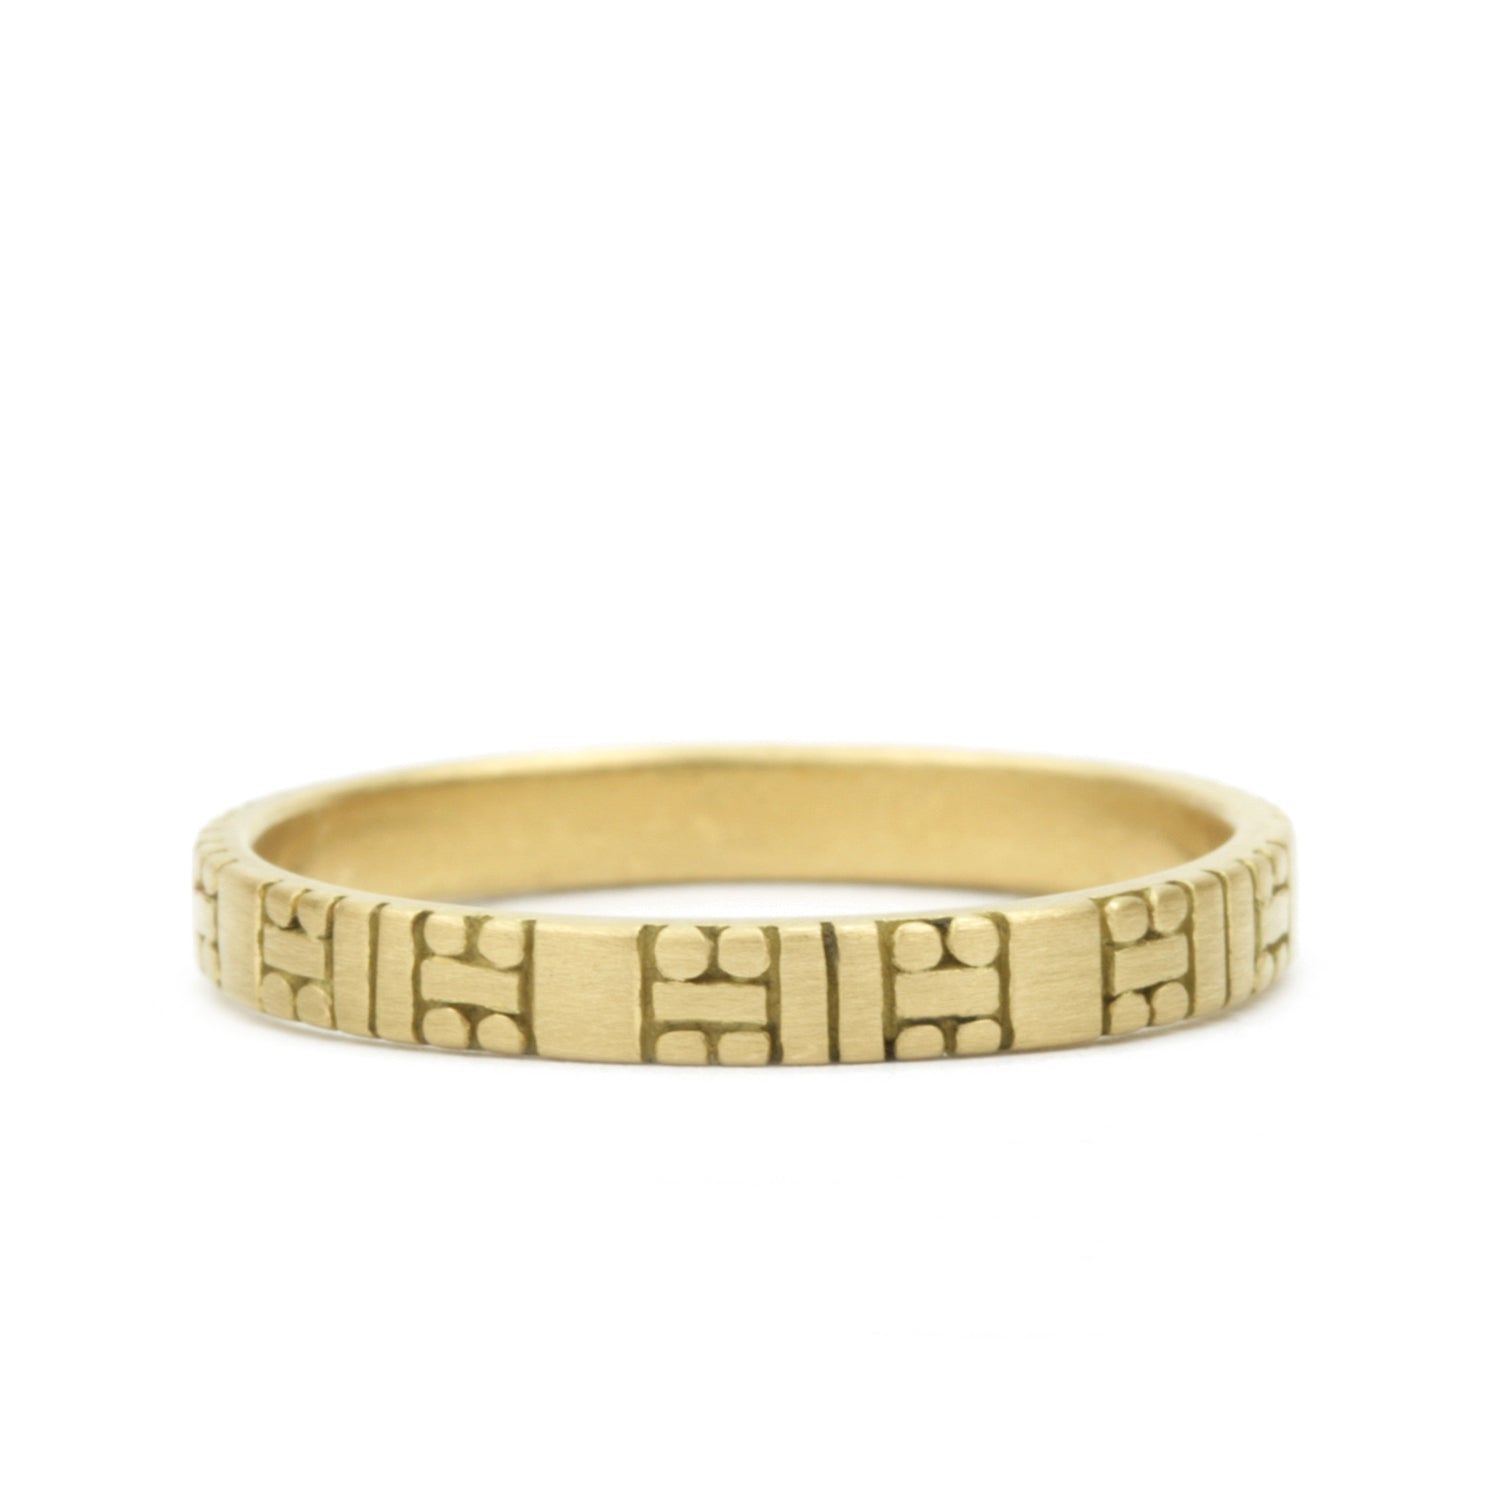 Code Band 2.75 mm, in 18K yellow gold